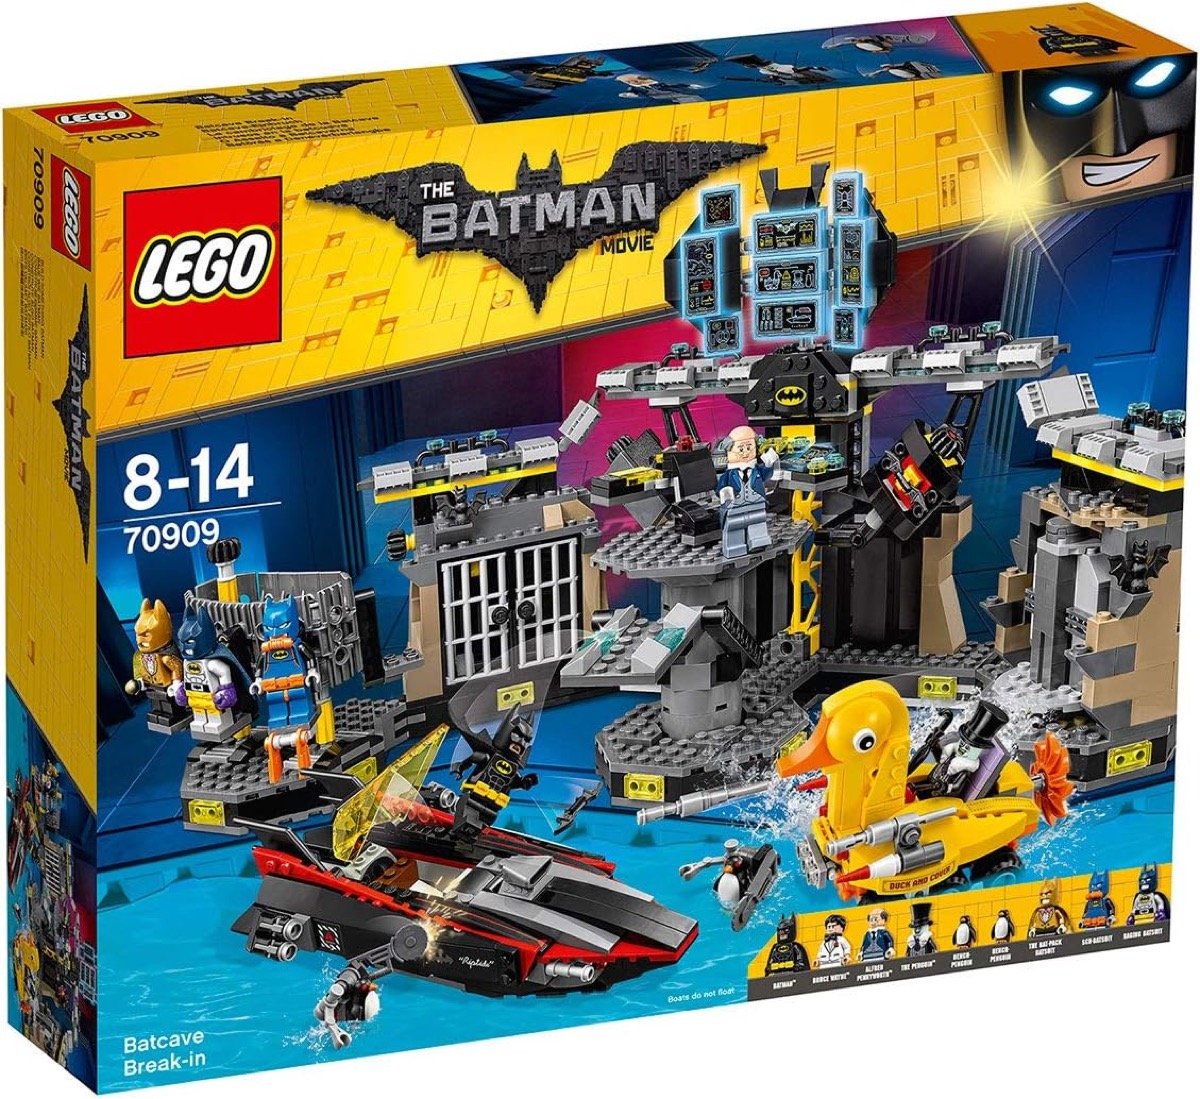 Penguin breaks into the LEGO Batcave on a rubbery ducky boat in this LEGO set 